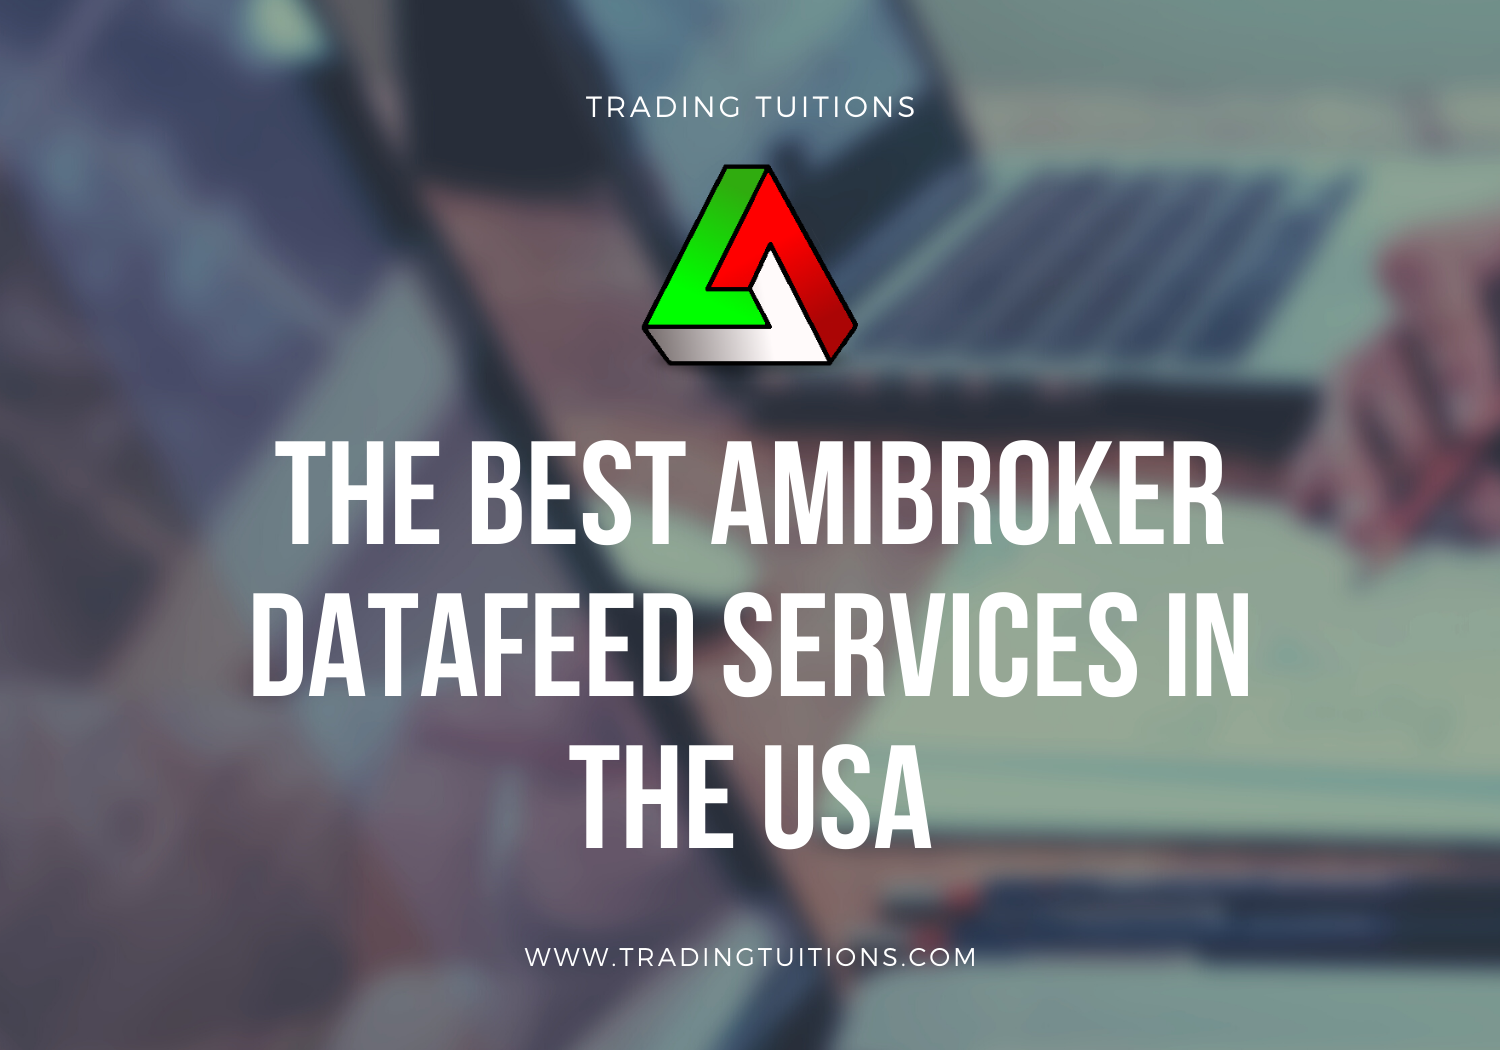 The Best Amibroker Datafeed Services in the USA